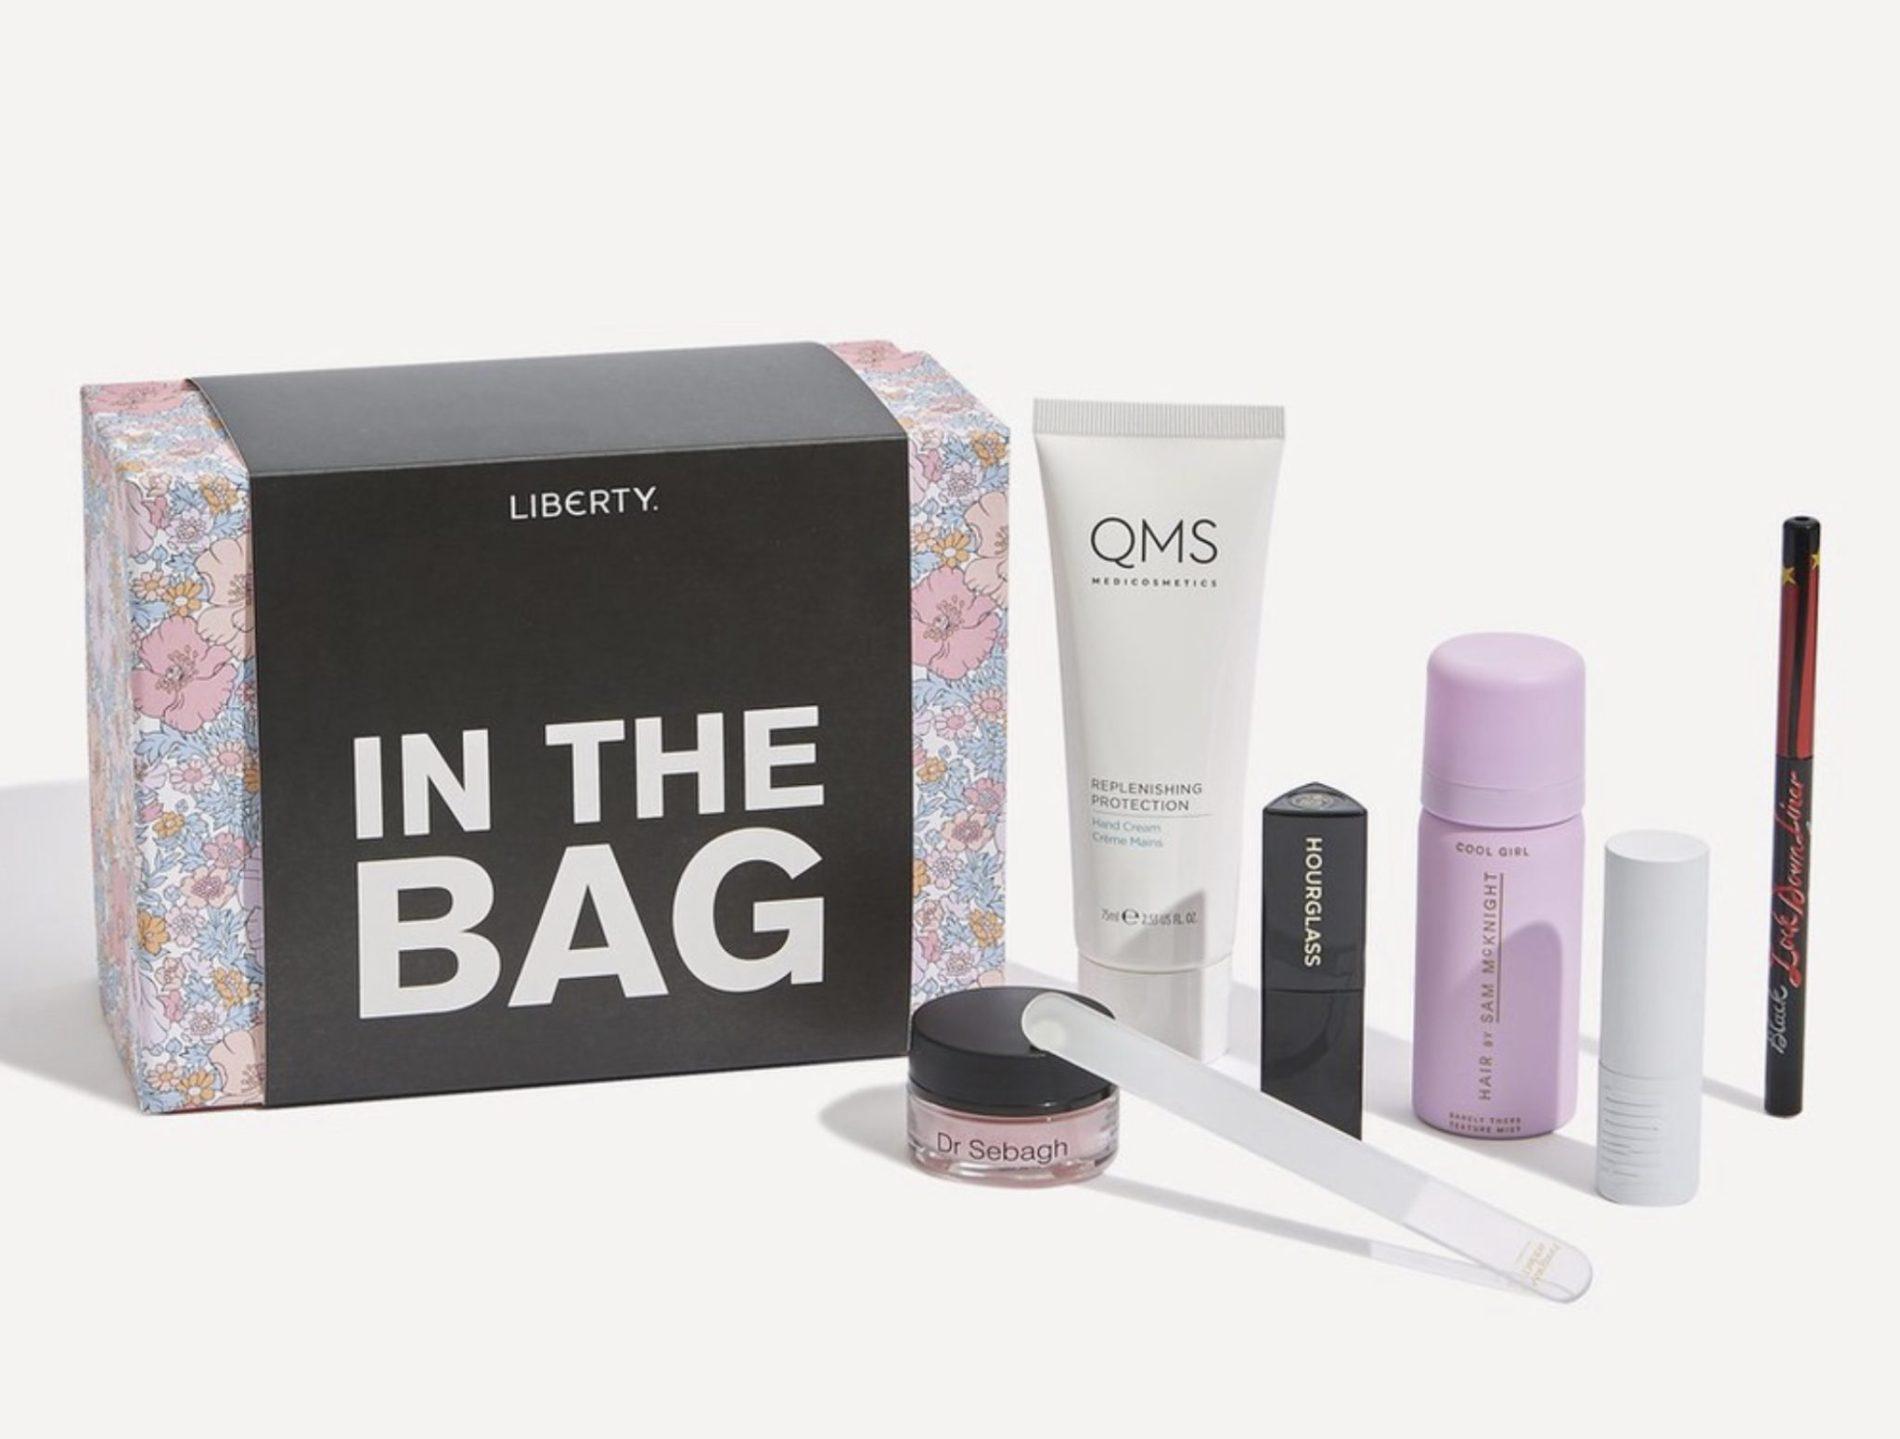 Liberty London “In The Bag” Beauty Kit – Now Available!